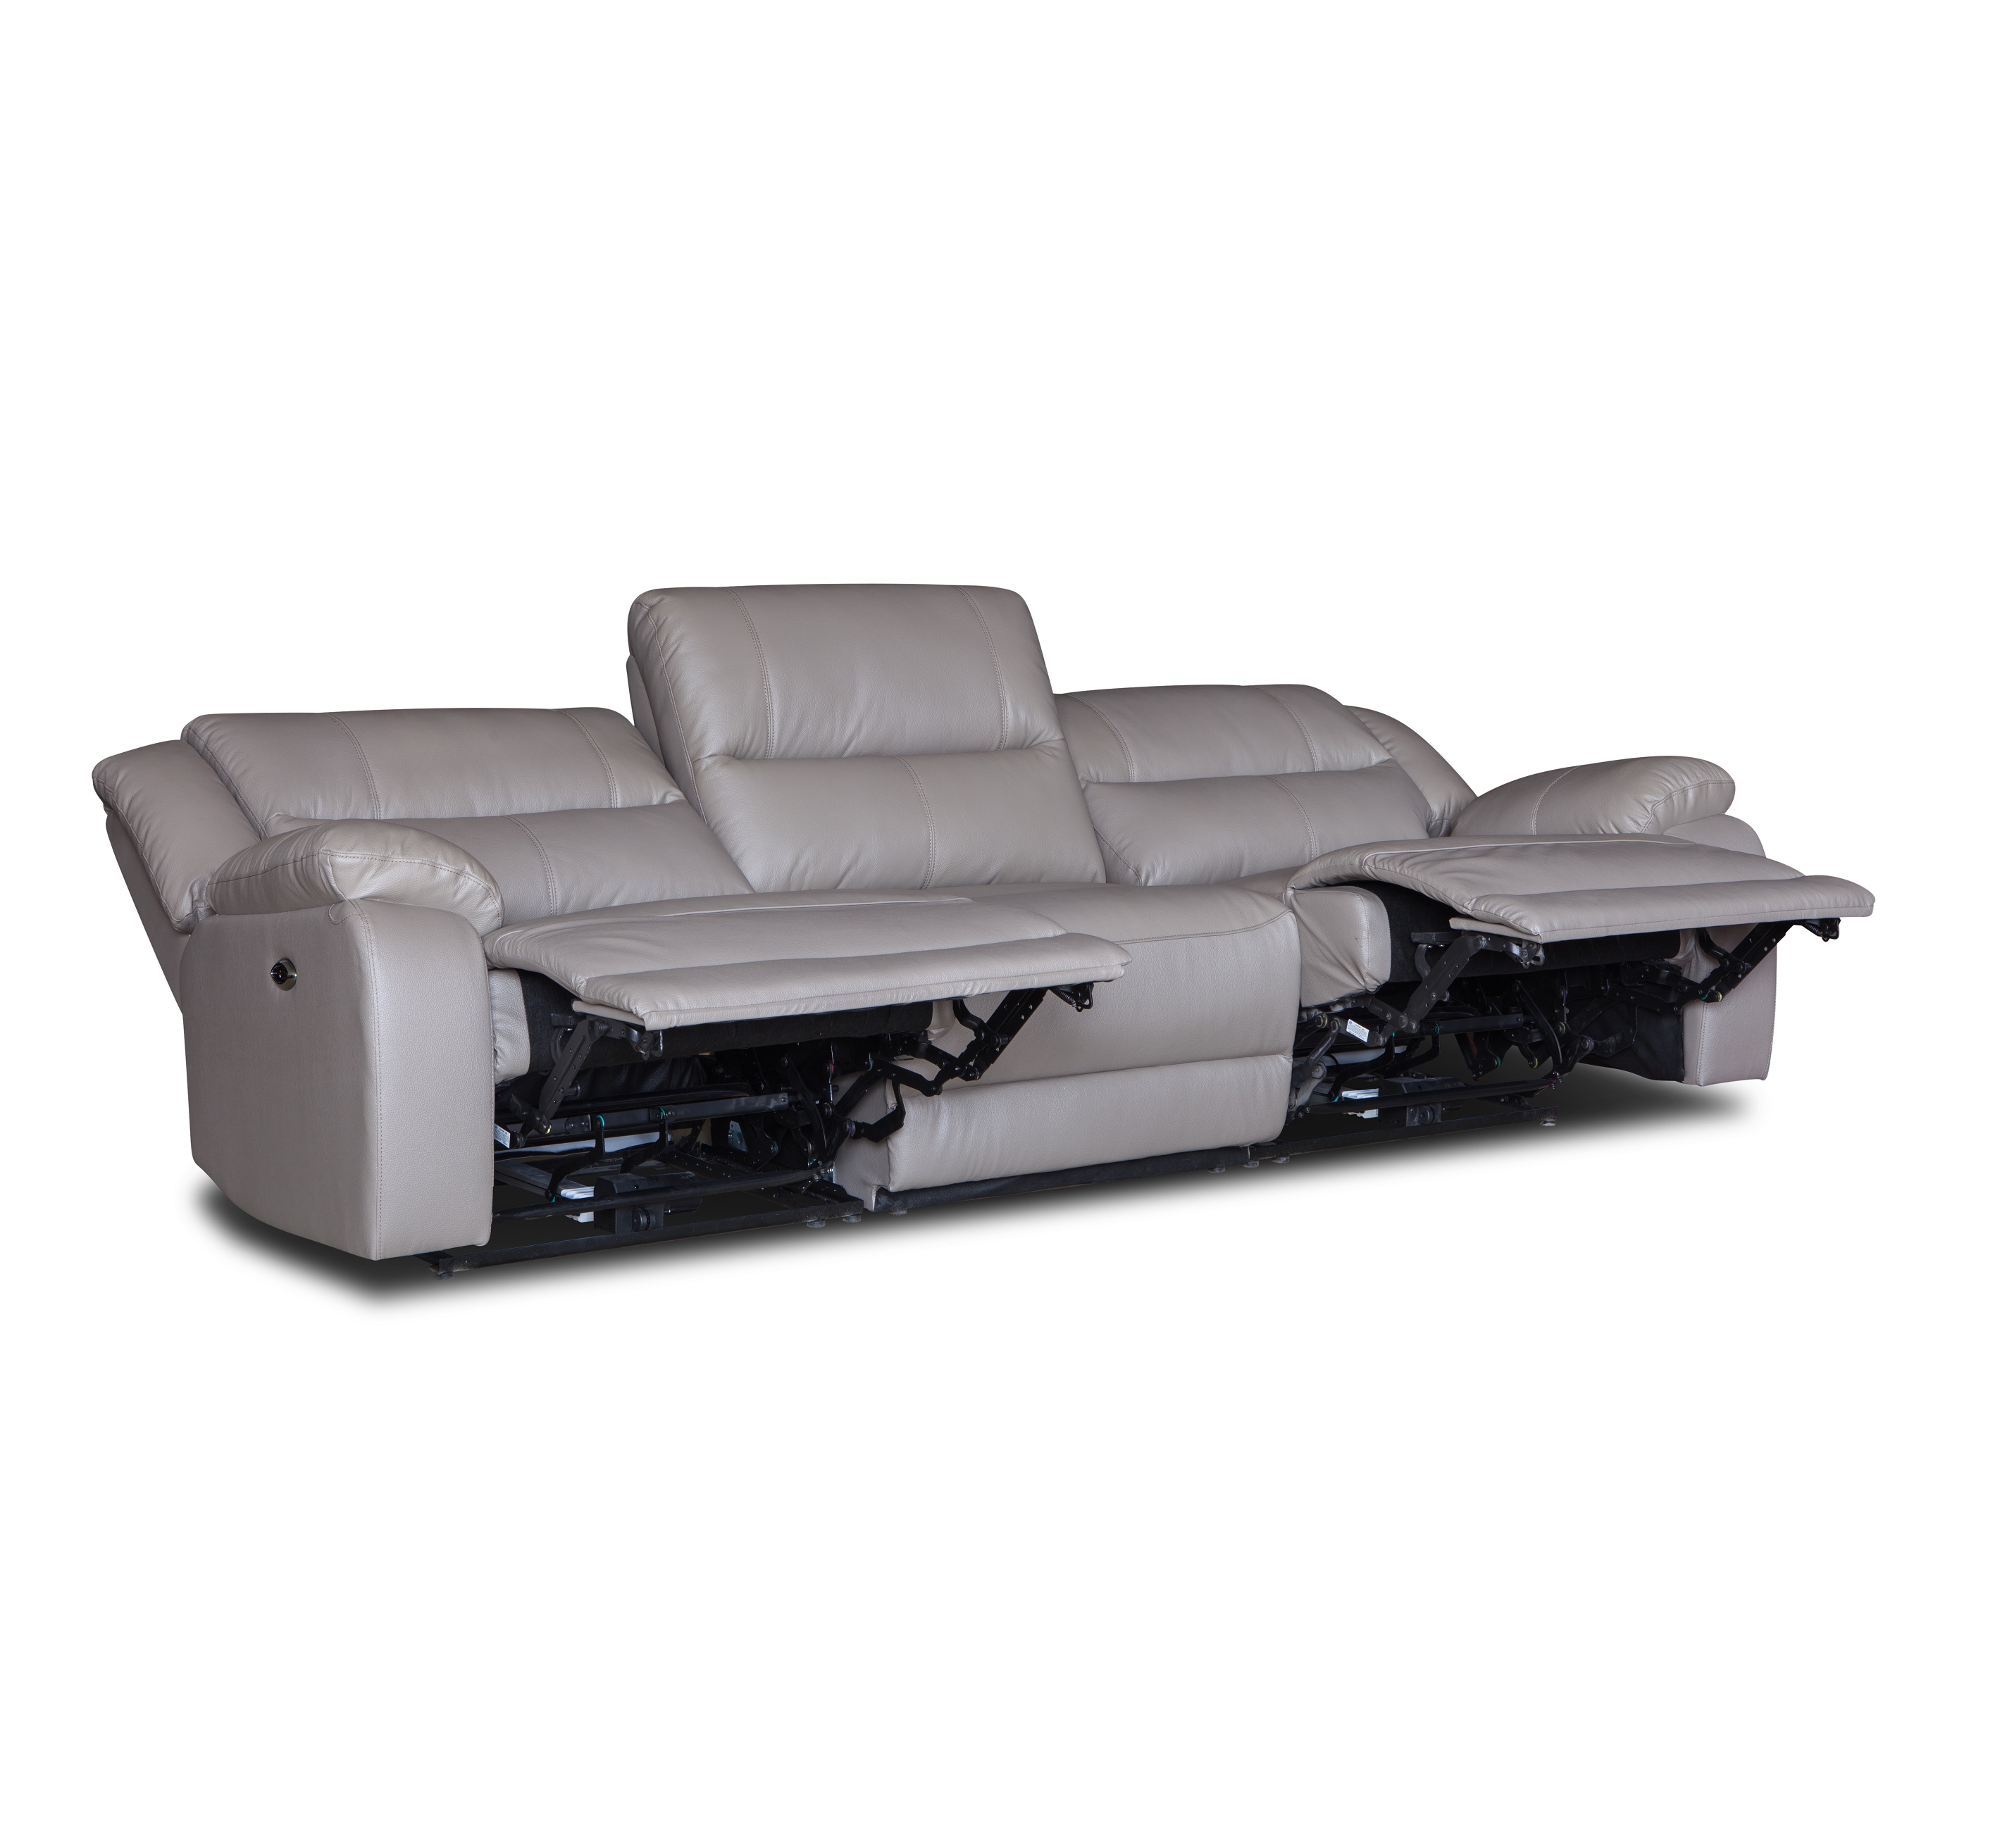 Luxury 3 seater functional recliner italy white genuine leather sofa set